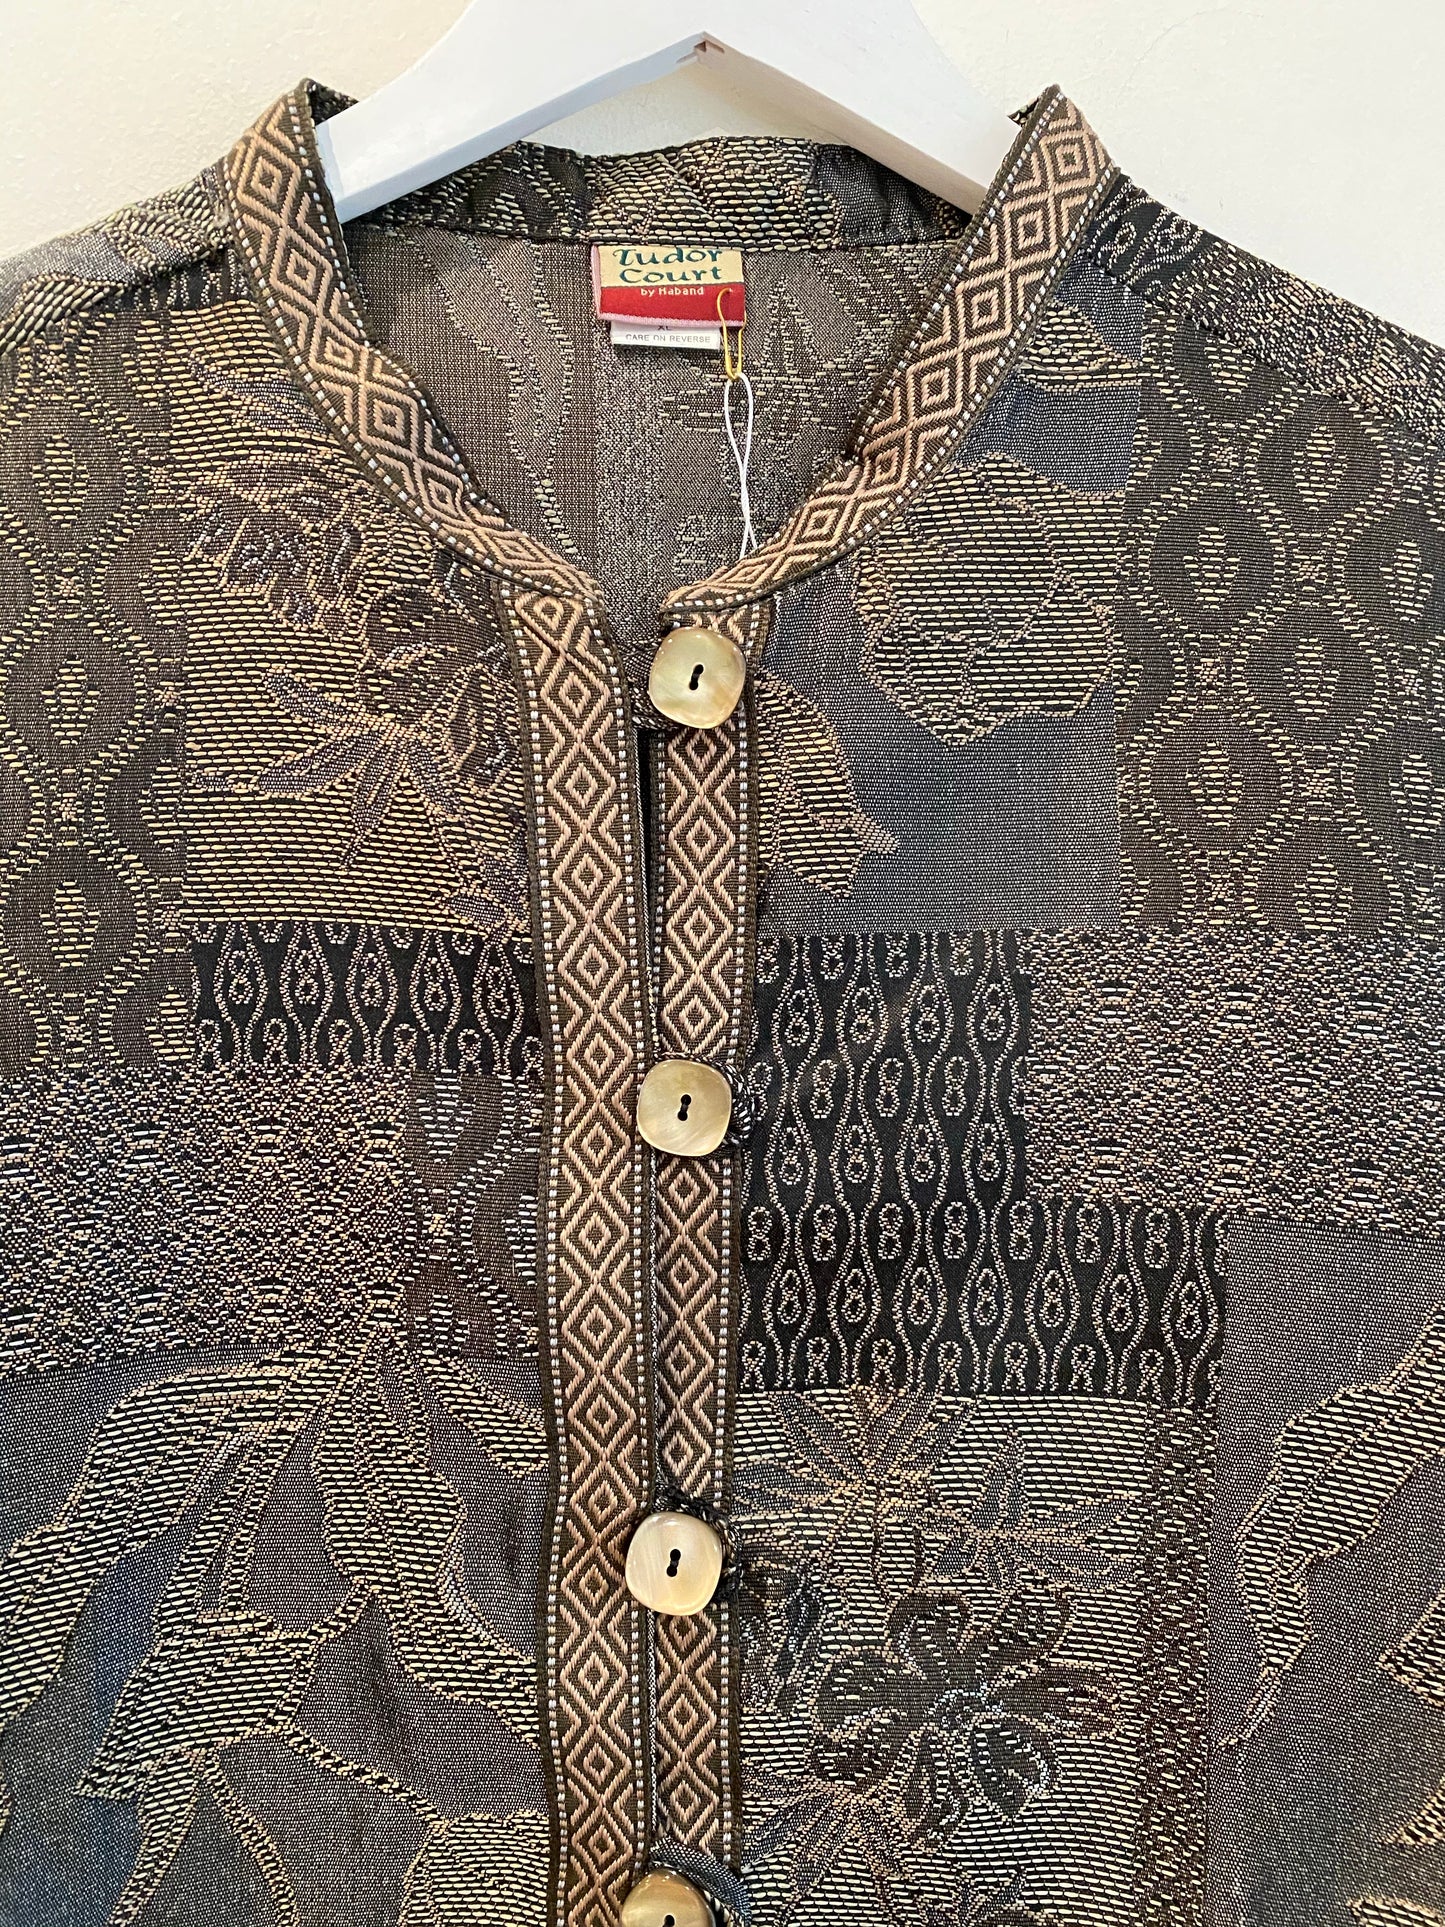 The Michelle Jacket, 1990's